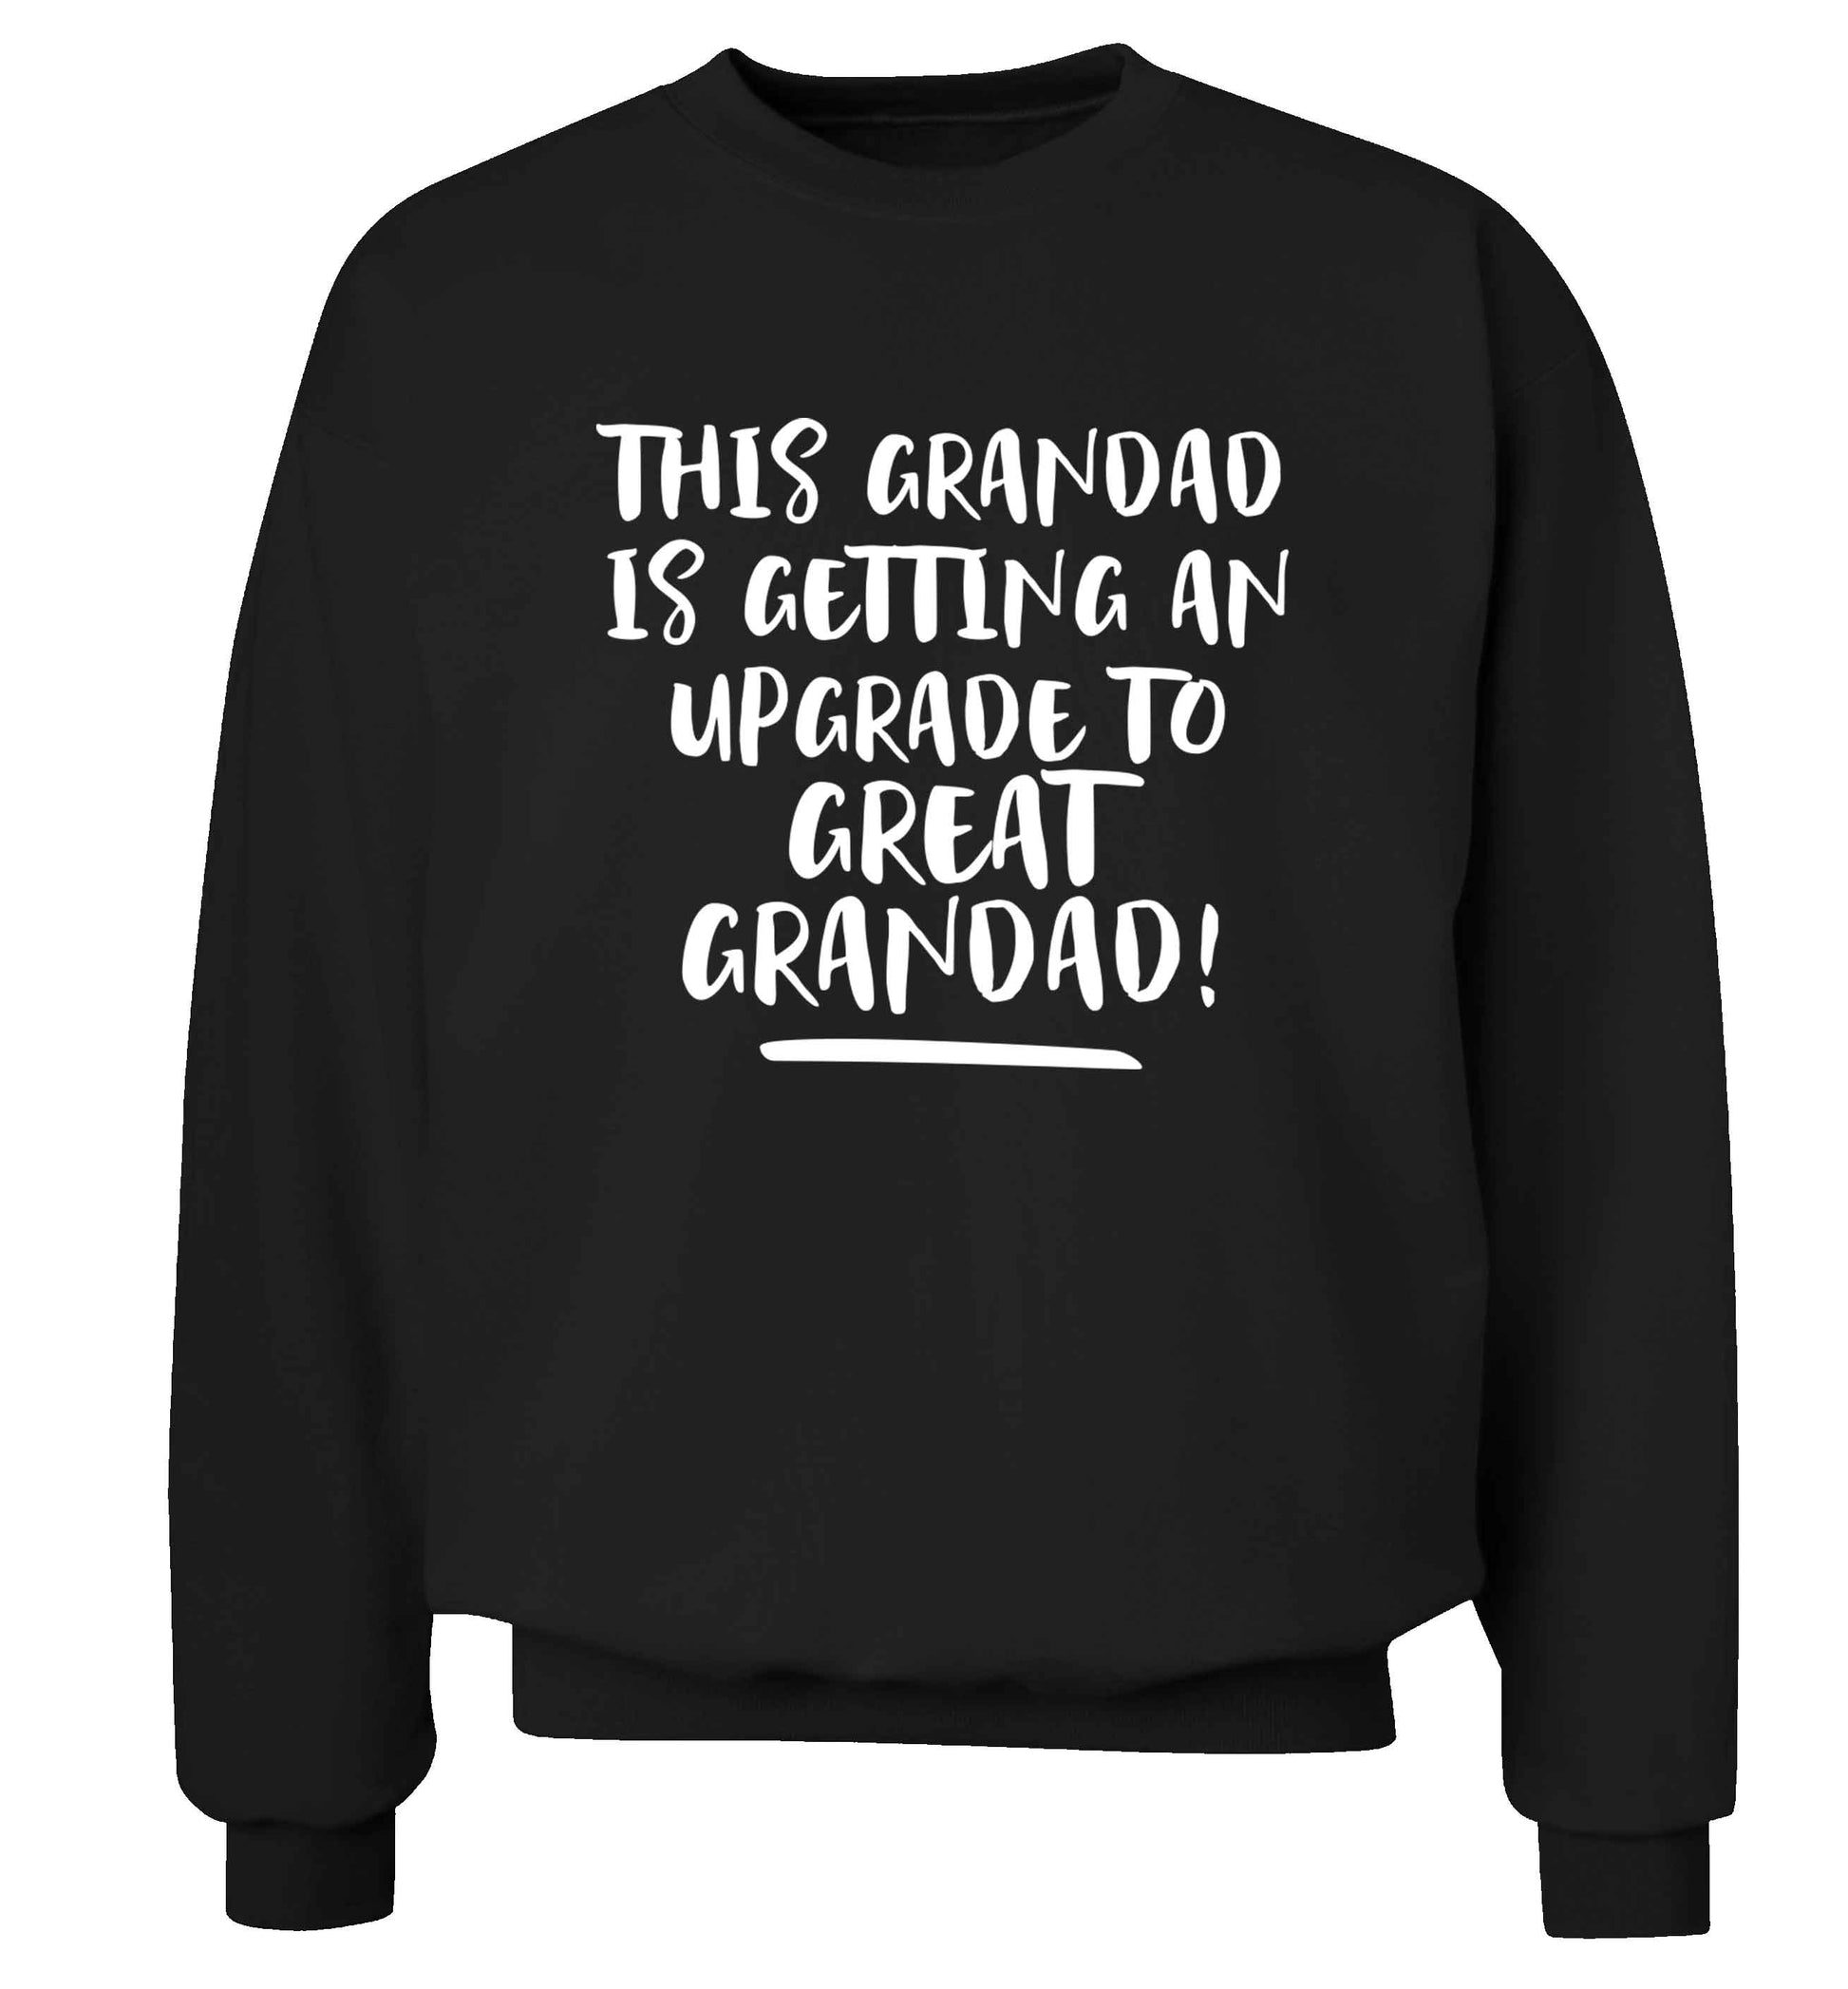 This grandad is getting an upgrade to great grandad! Adult's unisex black Sweater 2XL